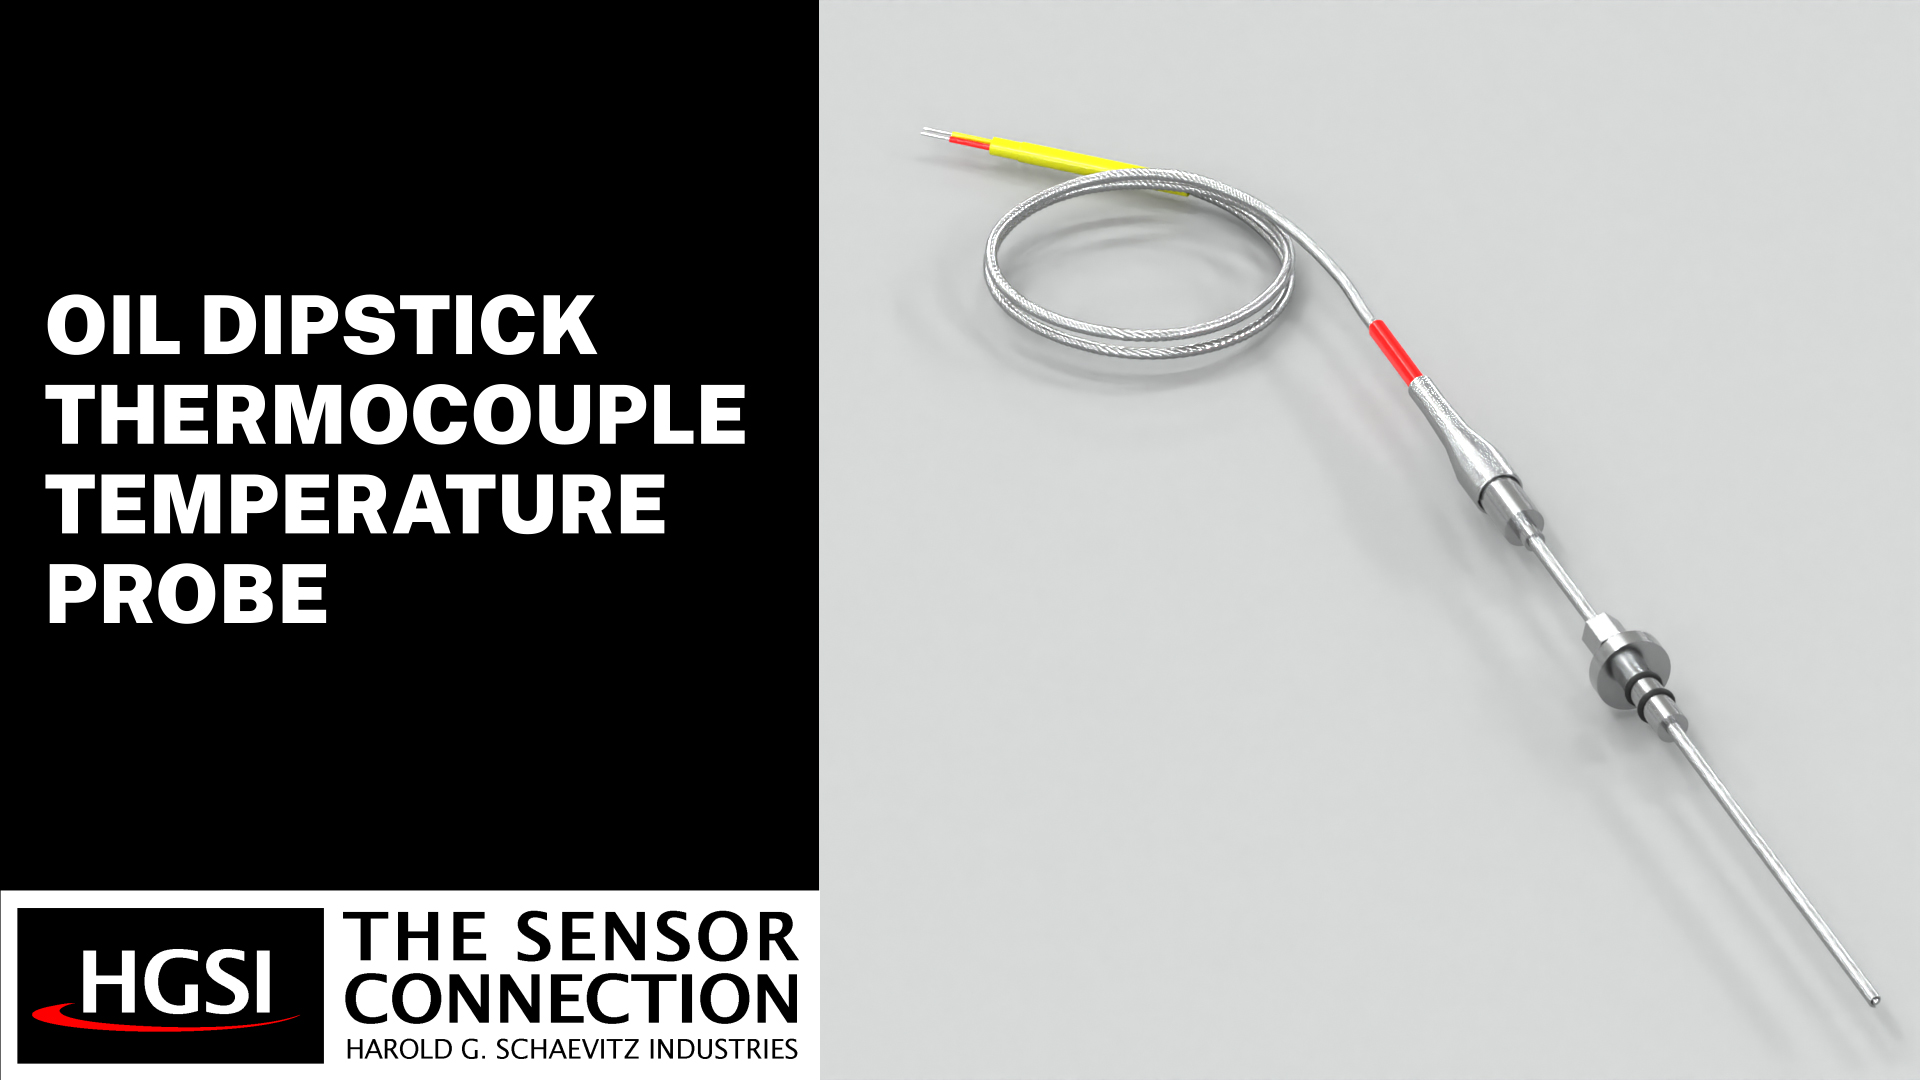 Oil Dipstick Thermocouple Probe Product Overview Video Thumbnail